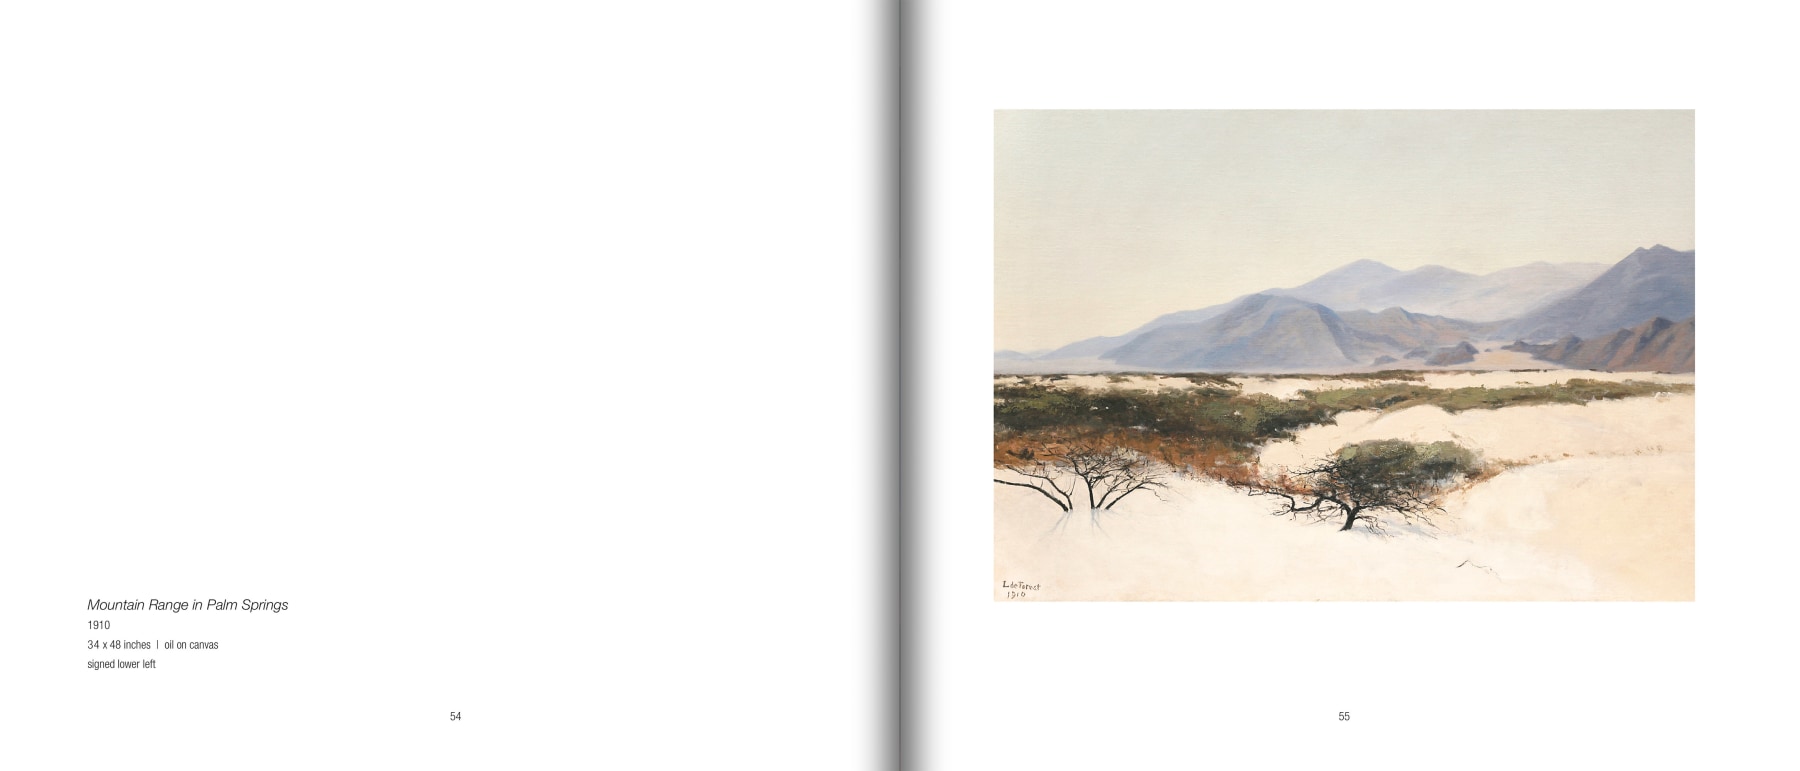 Pages 54 and 55 of De Forest's PALM SPRINGS, featuring &quot;Mountain Range in Palm Springs&quot;, 1910 by Lockwood de Forest (1850-1932)